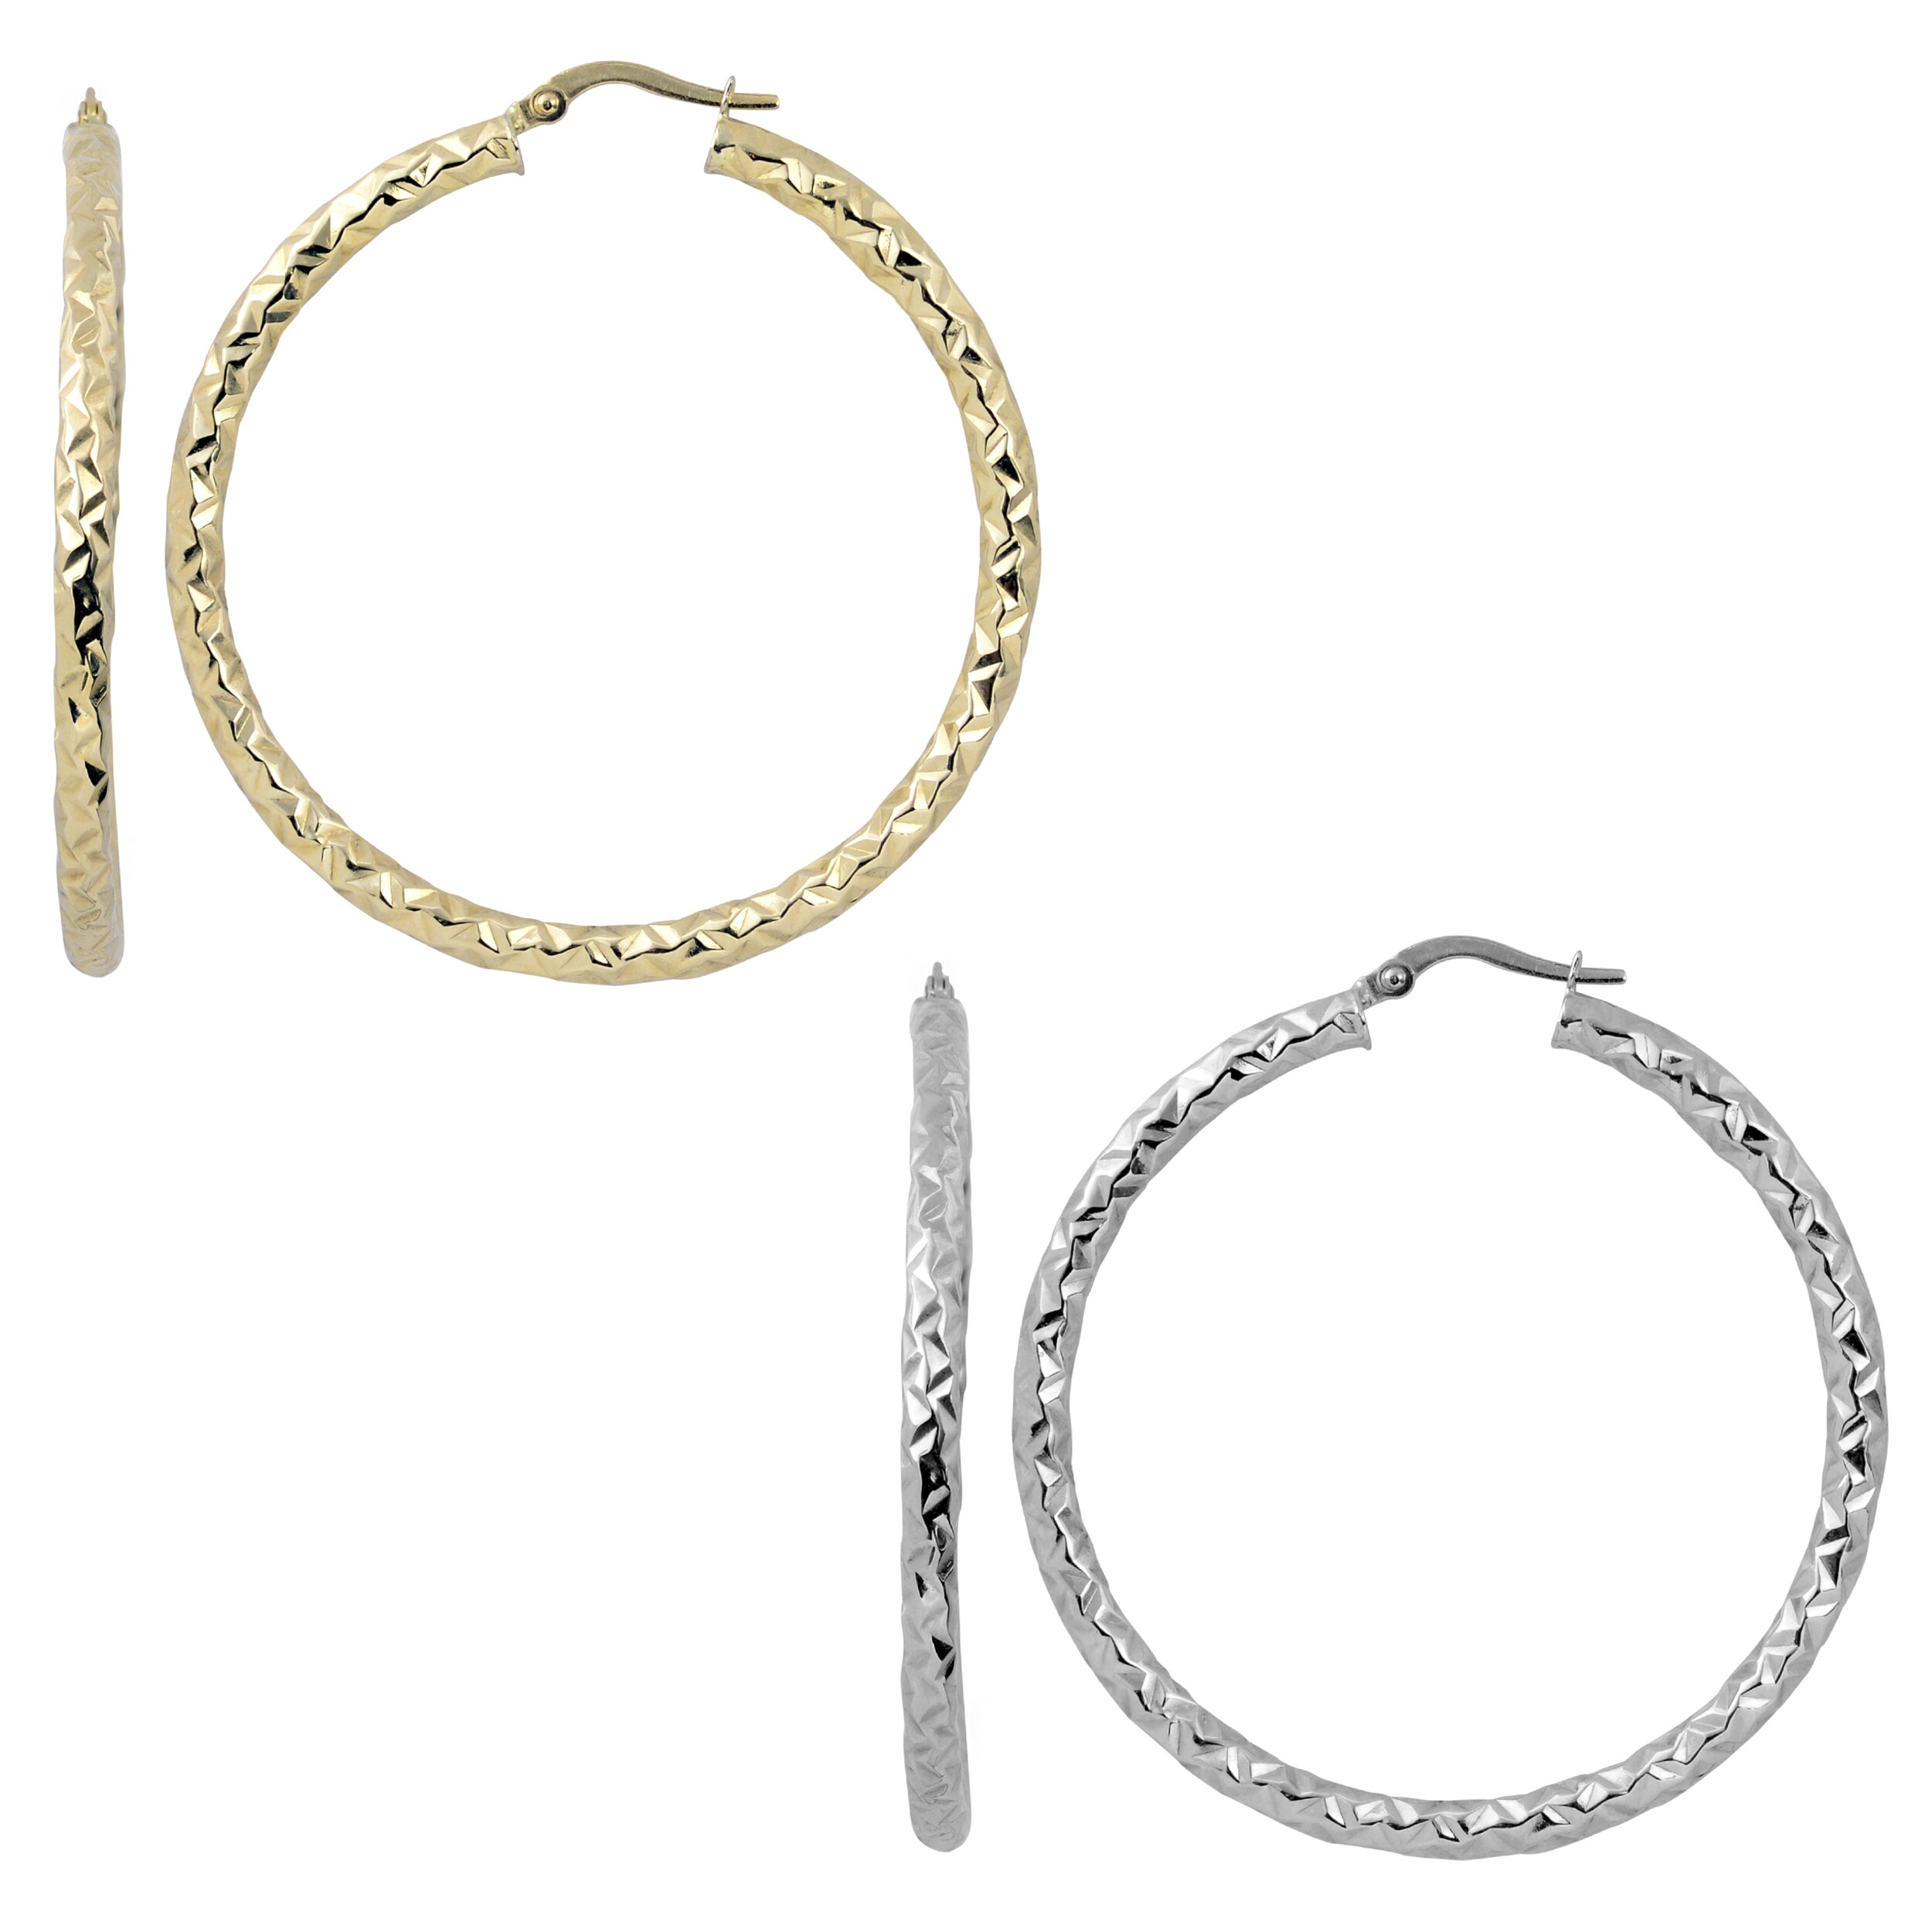 23mm x 23mm Solid 14k White Gold Polished and Diamond-Cut Hoop Earrings 